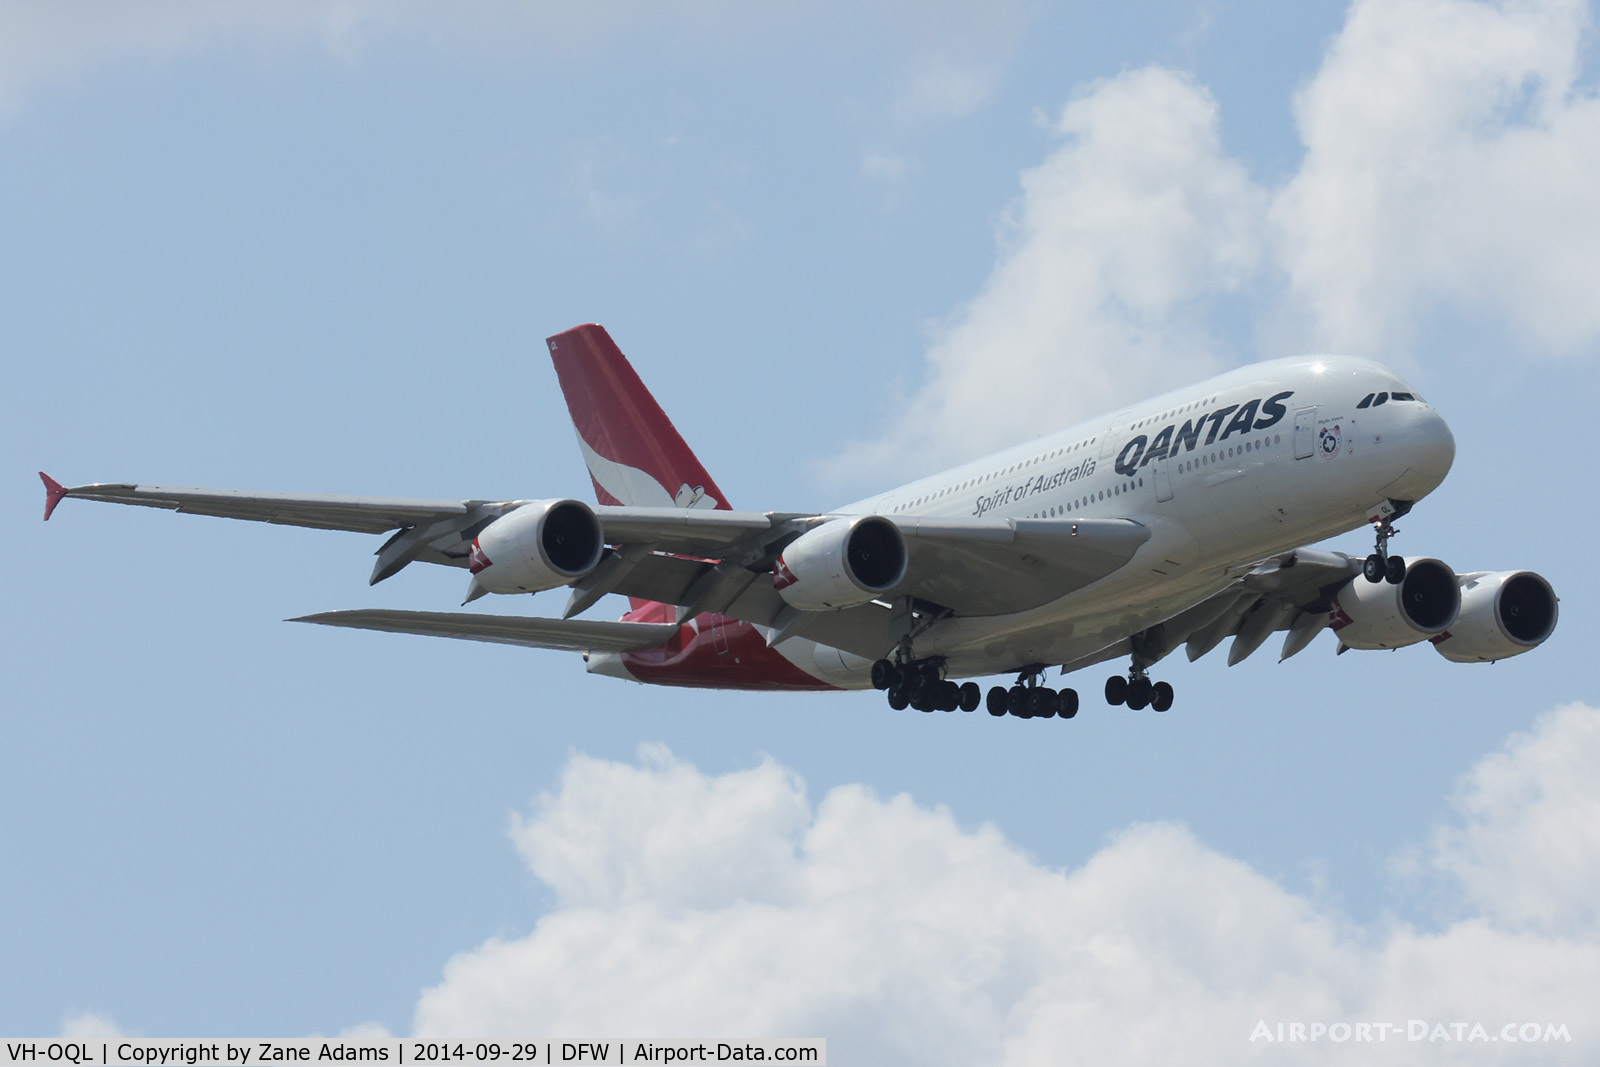 VH-OQL, 2011 Airbus A380-842 C/N 074, First scheduled A380 flight to DFW Ariport